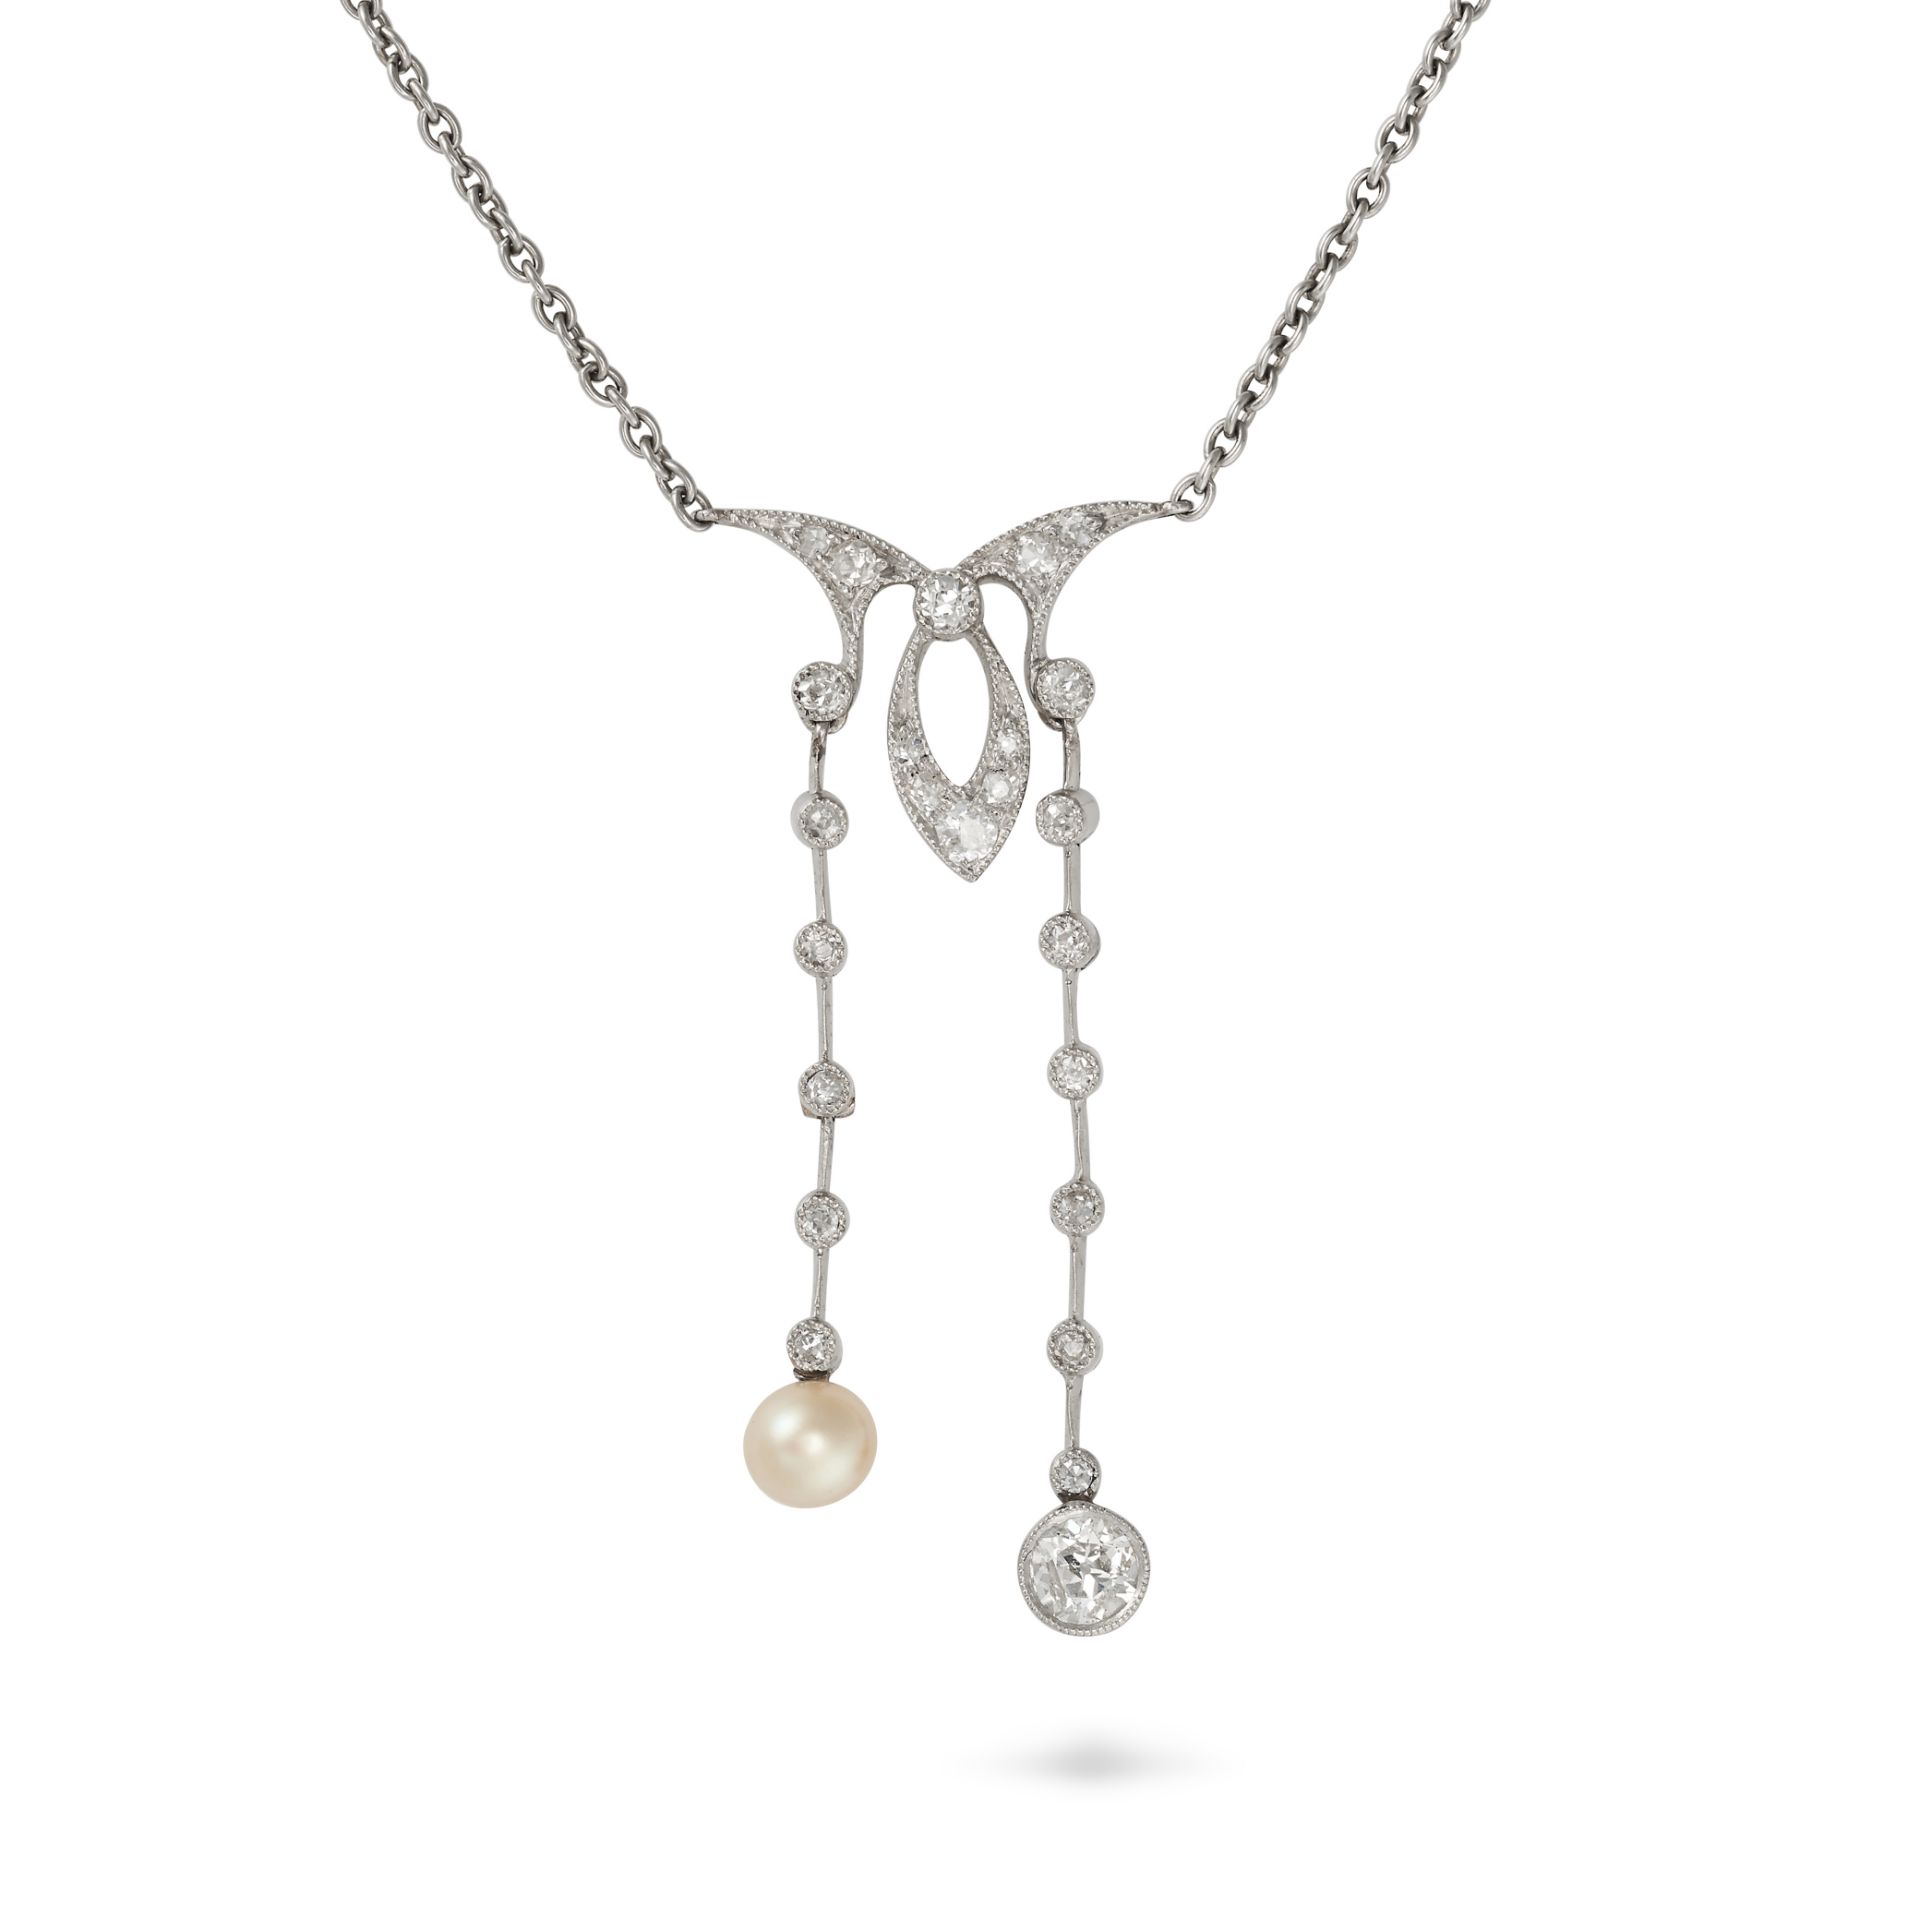 A DIAMOND AND PEARL NEGLIGEE NECKLACE the scrolling pendant set with round cut diamonds, suspendi...